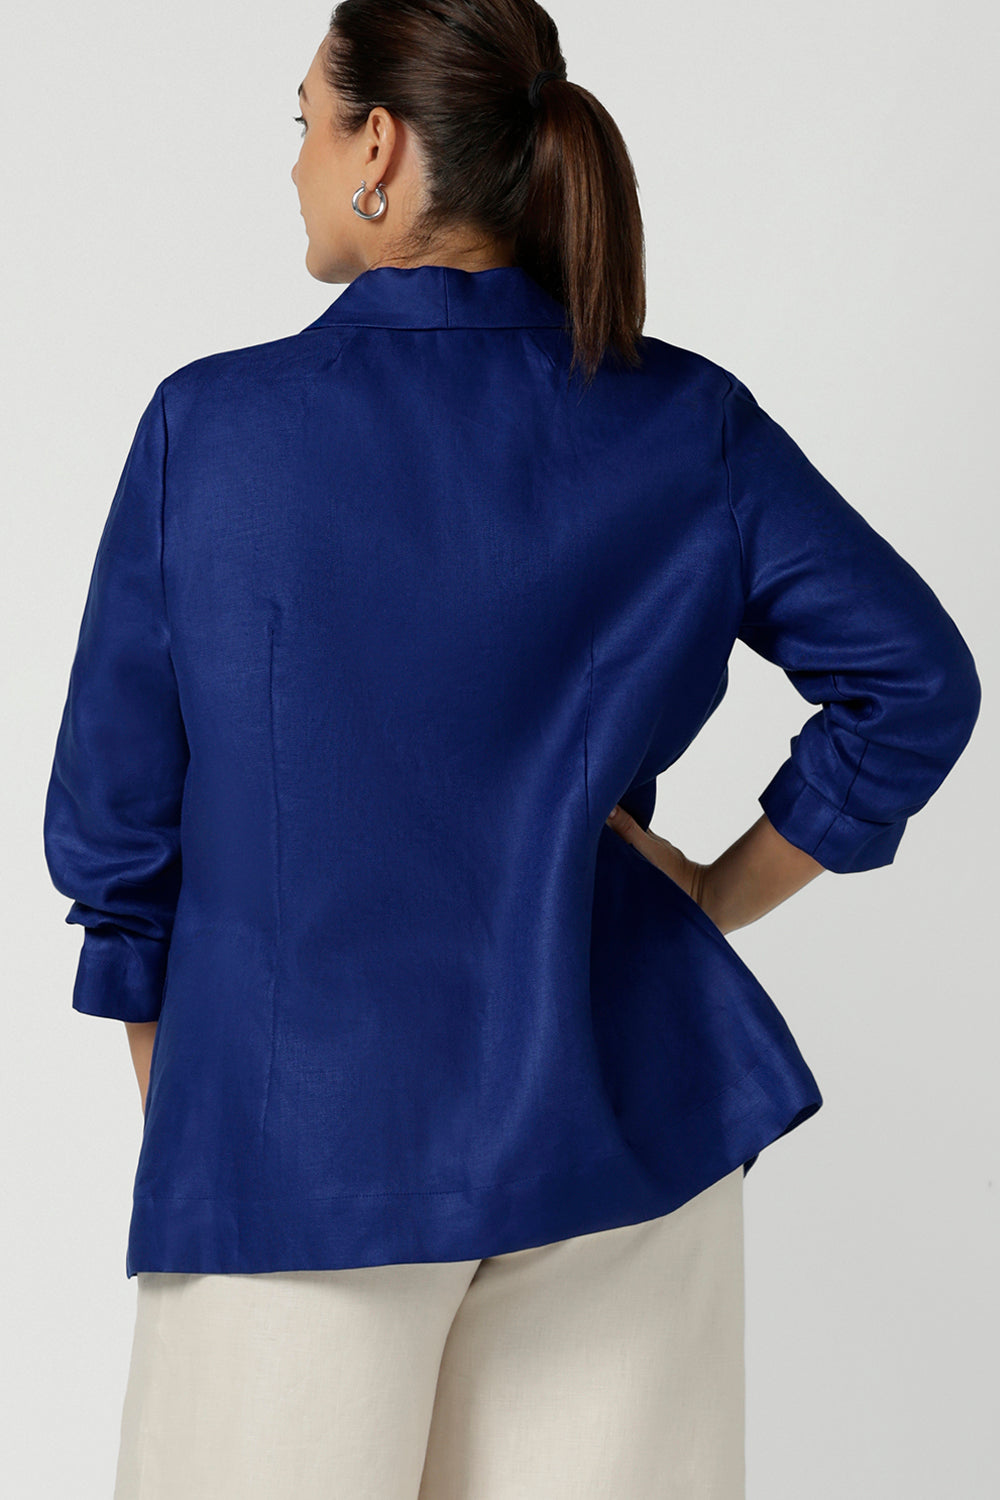 Back view of a Houston Blazer in Cobalt Linen. Softly tailored in Linen with front pockets and a functioning button front. Made in Australia for women size 8 - 24. Styled back with Nik Pants in Parchment Linen and a Cobalt Eddy cami top.